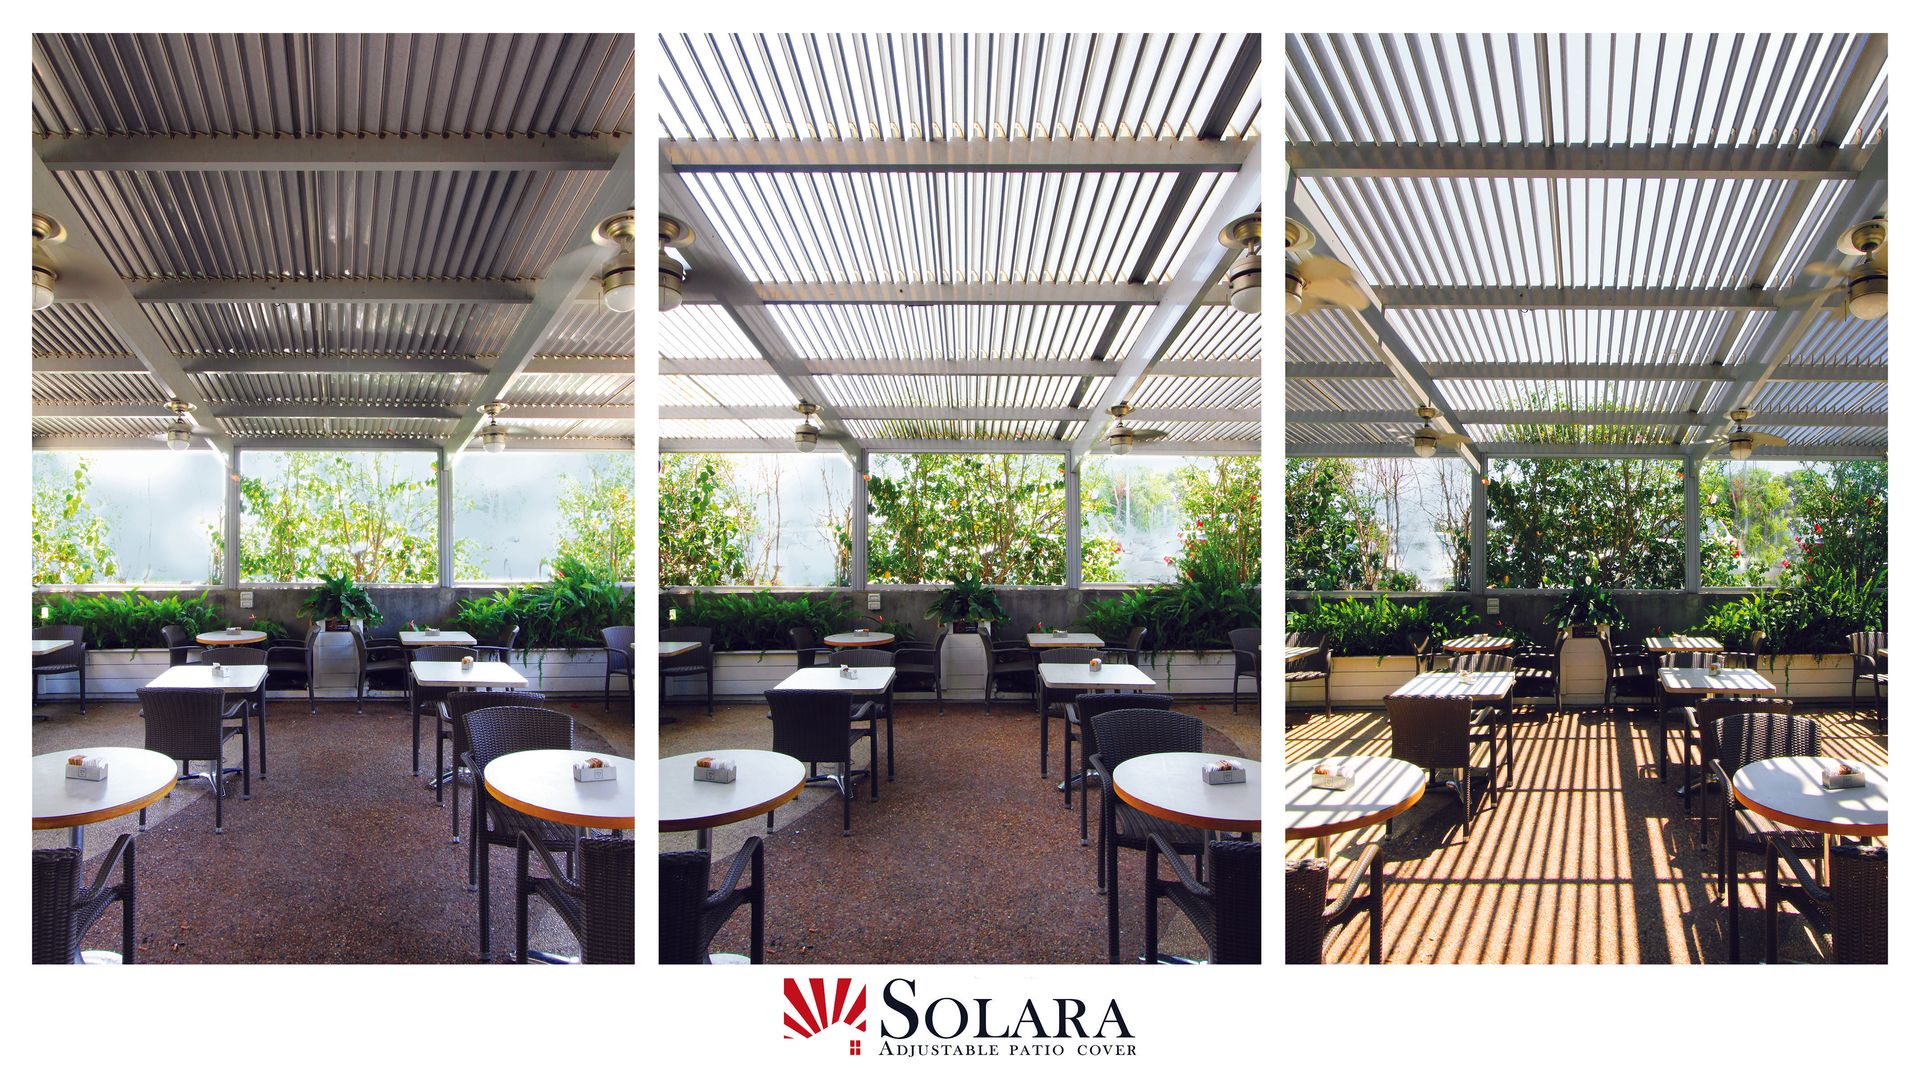 Solara Patio Covers Ad Showing Opened & Closed Positions